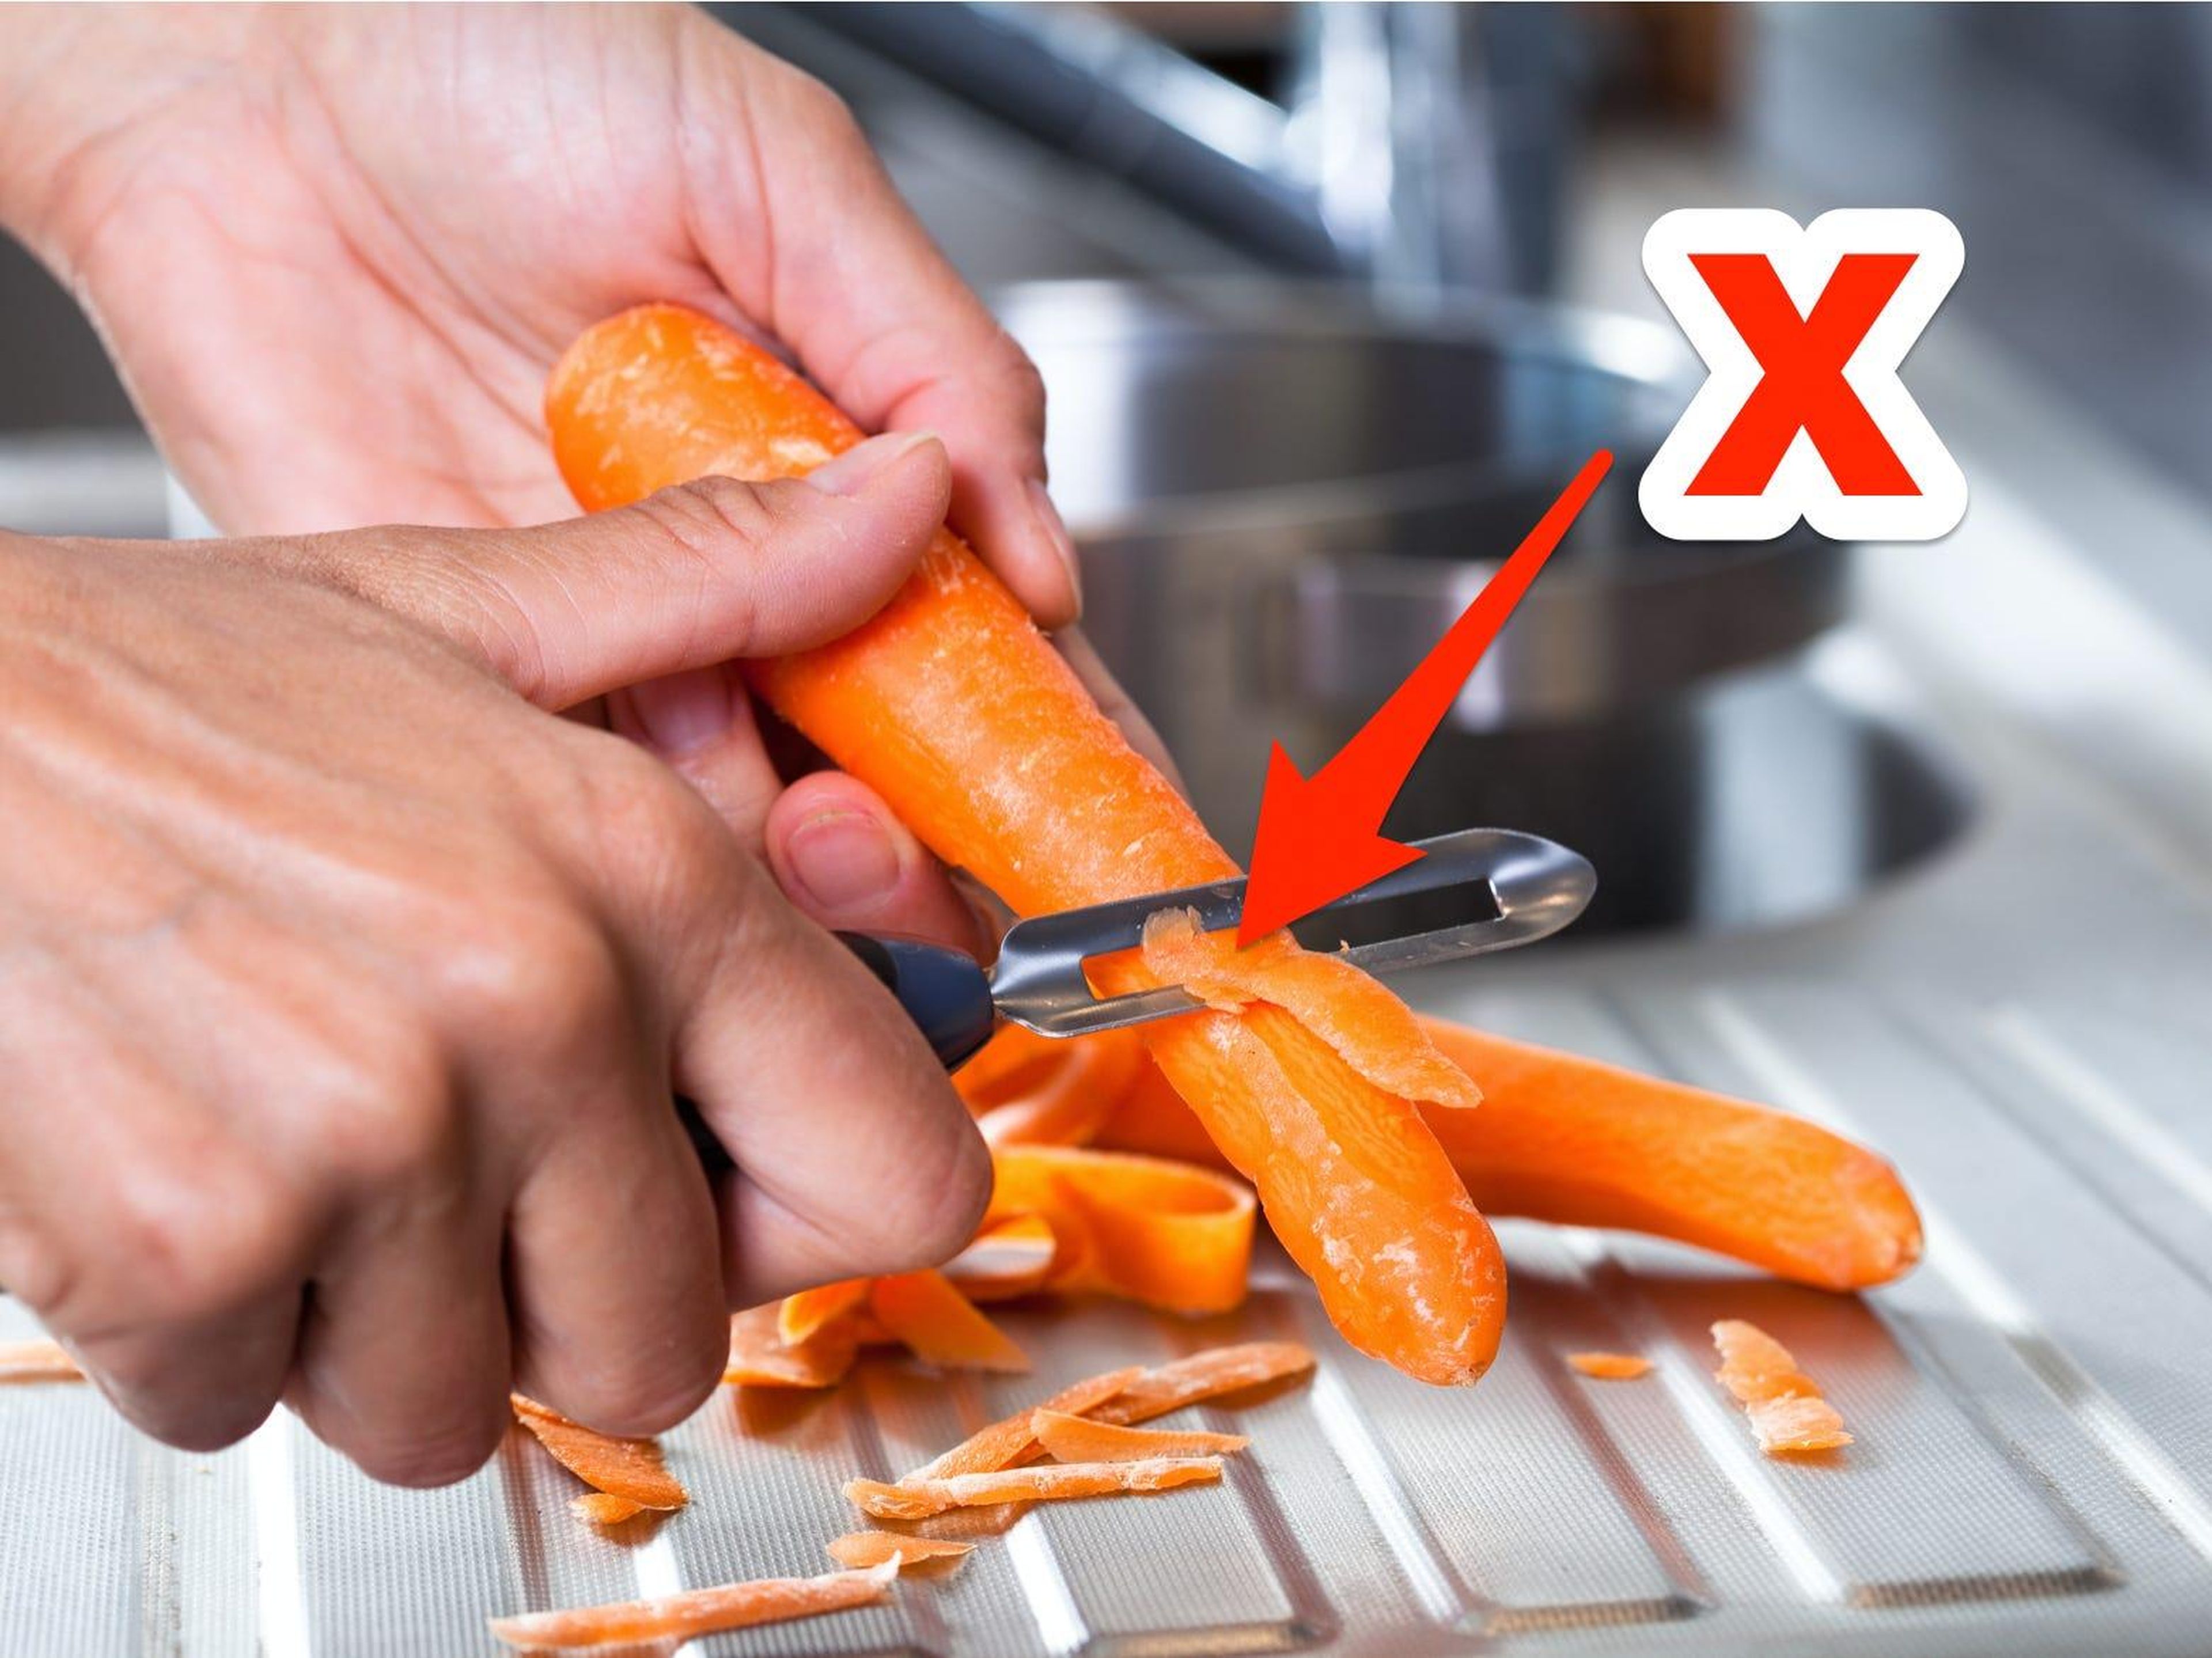 Peeling carrots wastes time and nutrients.